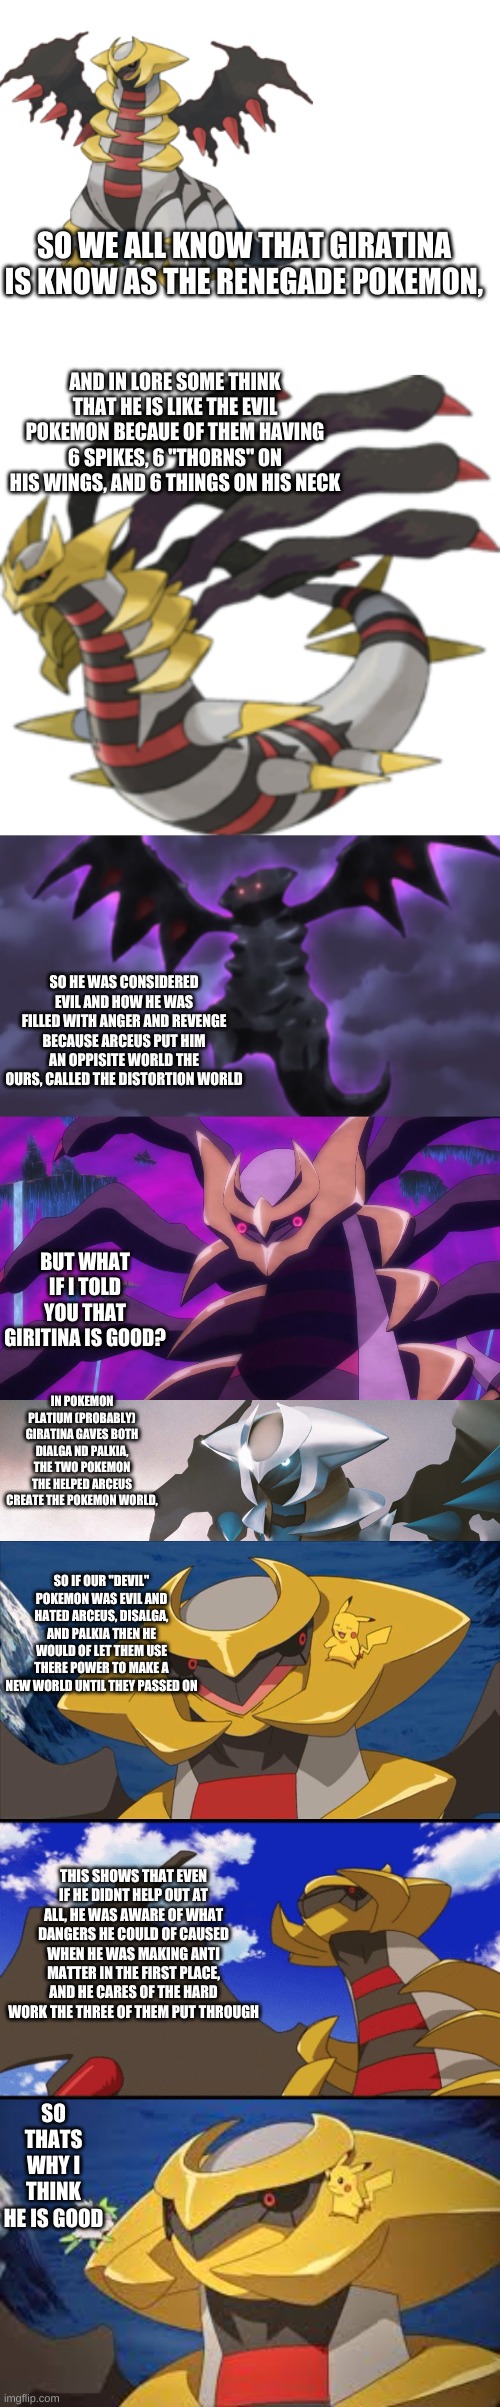 i got bored | SO WE ALL KNOW THAT GIRATINA IS KNOW AS THE RENEGADE POKEMON, AND IN LORE SOME THINK THAT HE IS LIKE THE EVIL POKEMON BECAUE OF THEM HAVING 6 SPIKES, 6 "THORNS" ON HIS WINGS, AND 6 THINGS ON HIS NECK; SO HE WAS CONSIDERED EVIL AND HOW HE WAS FILLED WITH ANGER AND REVENGE BECAUSE ARCEUS PUT HIM AN OPPISITE WORLD THE OURS, CALLED THE DISTORTION WORLD; BUT WHAT IF I TOLD YOU THAT GIRITINA IS GOOD? IN POKEMON PLATIUM (PROBABLY) GIRATINA GAVES BOTH DIALGA ND PALKIA, THE TWO POKEMON THE HELPED ARCEUS CREATE THE POKEMON WORLD, SO IF OUR "DEVIL" POKEMON WAS EVIL AND HATED ARCEUS, DISALGA, AND PALKIA THEN HE WOULD OF LET THEM USE THERE POWER TO MAKE A NEW WORLD UNTIL THEY PASSED ON; THIS SHOWS THAT EVEN IF HE DIDNT HELP OUT AT ALL, HE WAS AWARE OF WHAT DANGERS HE COULD OF CAUSED WHEN HE WAS MAKING ANTI MATTER IN THE FIRST PLACE, AND HE CARES OF THE HARD WORK THE THREE OF THEM PUT THROUGH; SO THATS WHY I THINK HE IS GOOD | image tagged in blank white template | made w/ Imgflip meme maker